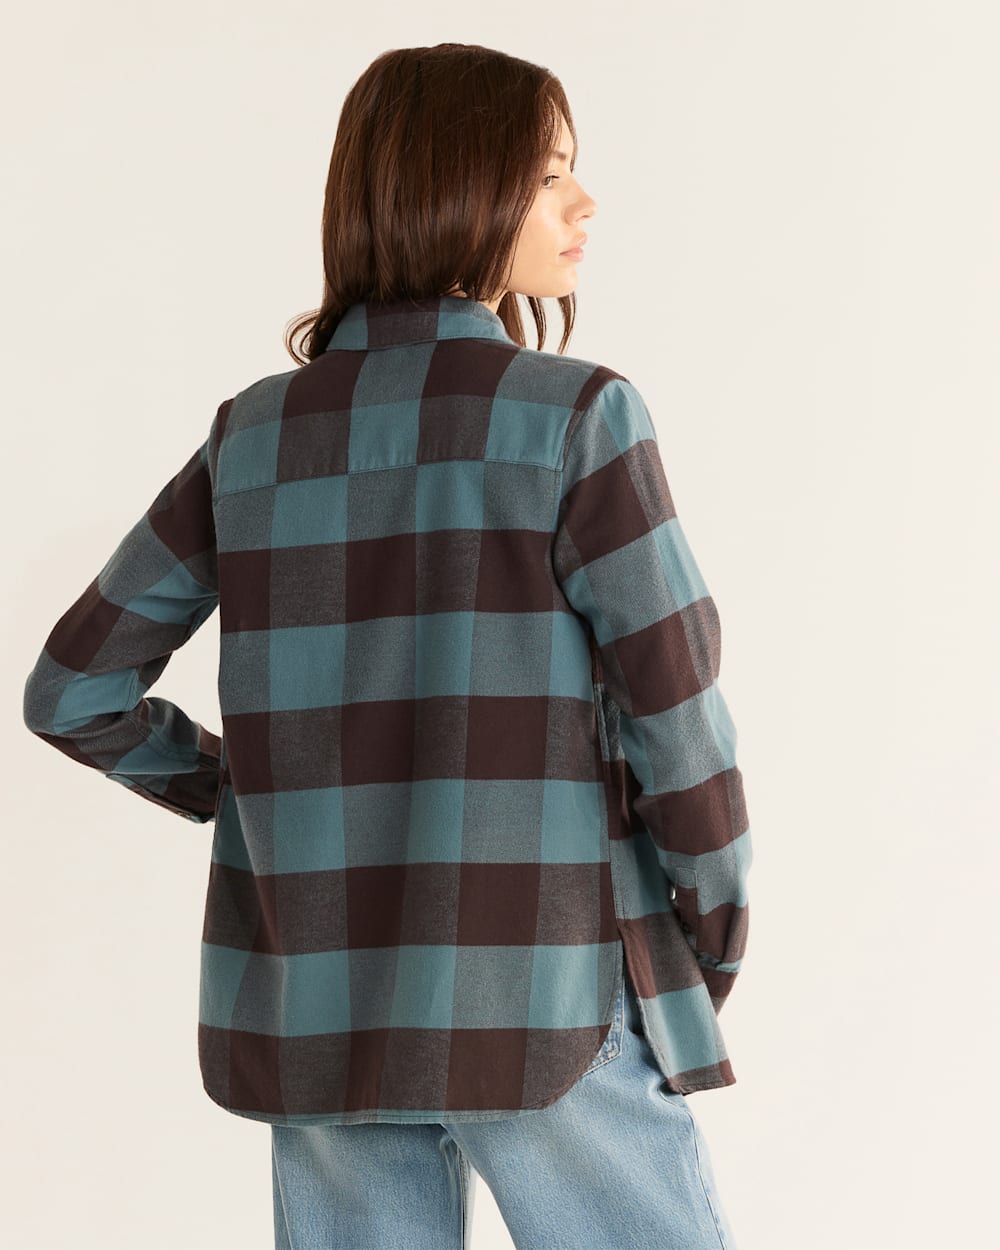 ALTERNATE VIEW OF WOMEN'S MADISON DOUBLE-BRUSHED FLANNEL SHIRT IN SHALE/COFFEE BUFFALO CHECK image number 3